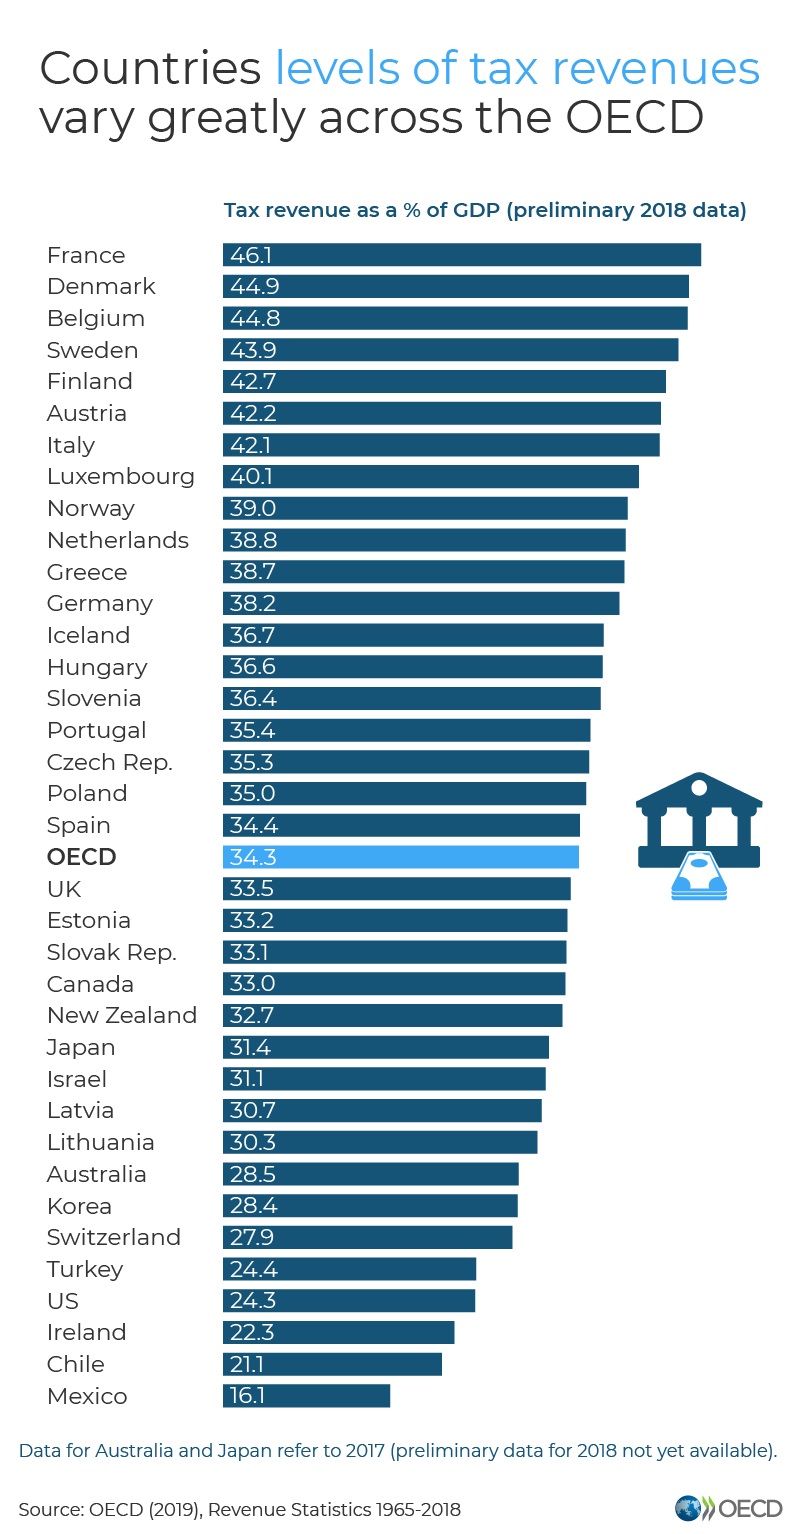 https://www.oecd.org/tax/tax-policy/tax-as-percentage-of-gdp-oecd.png